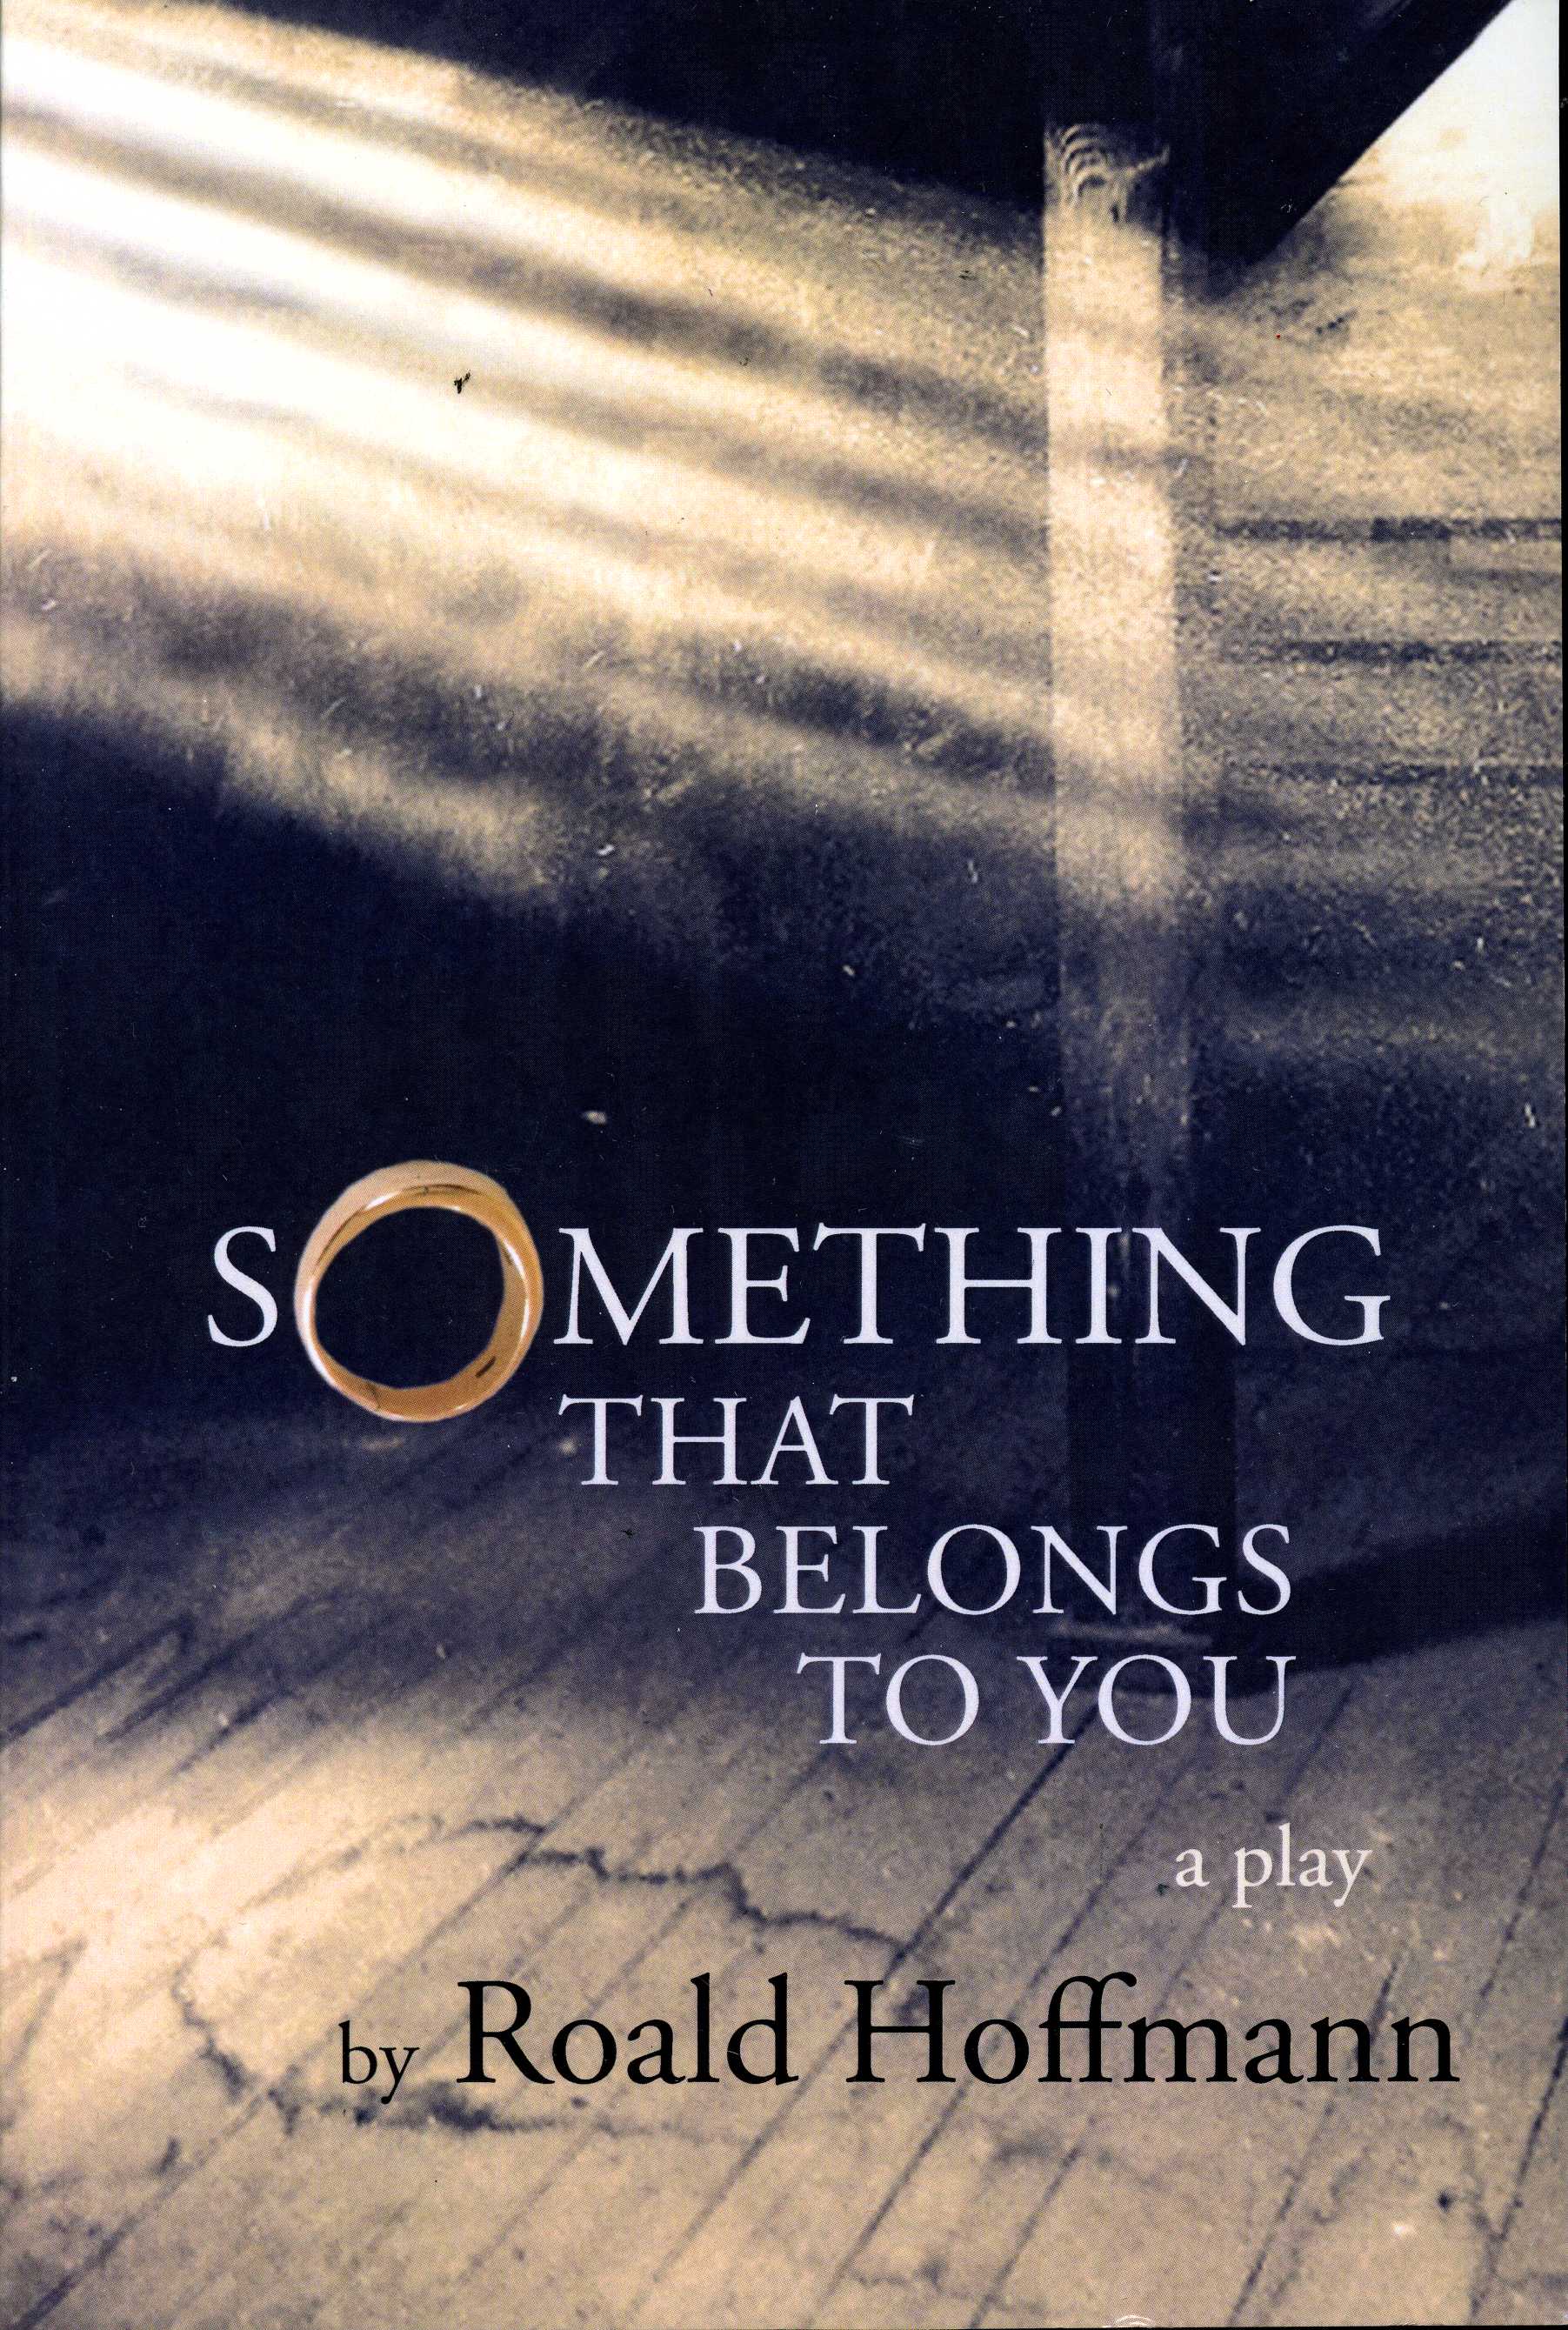 Play, published 2015, by Dos Madres Press